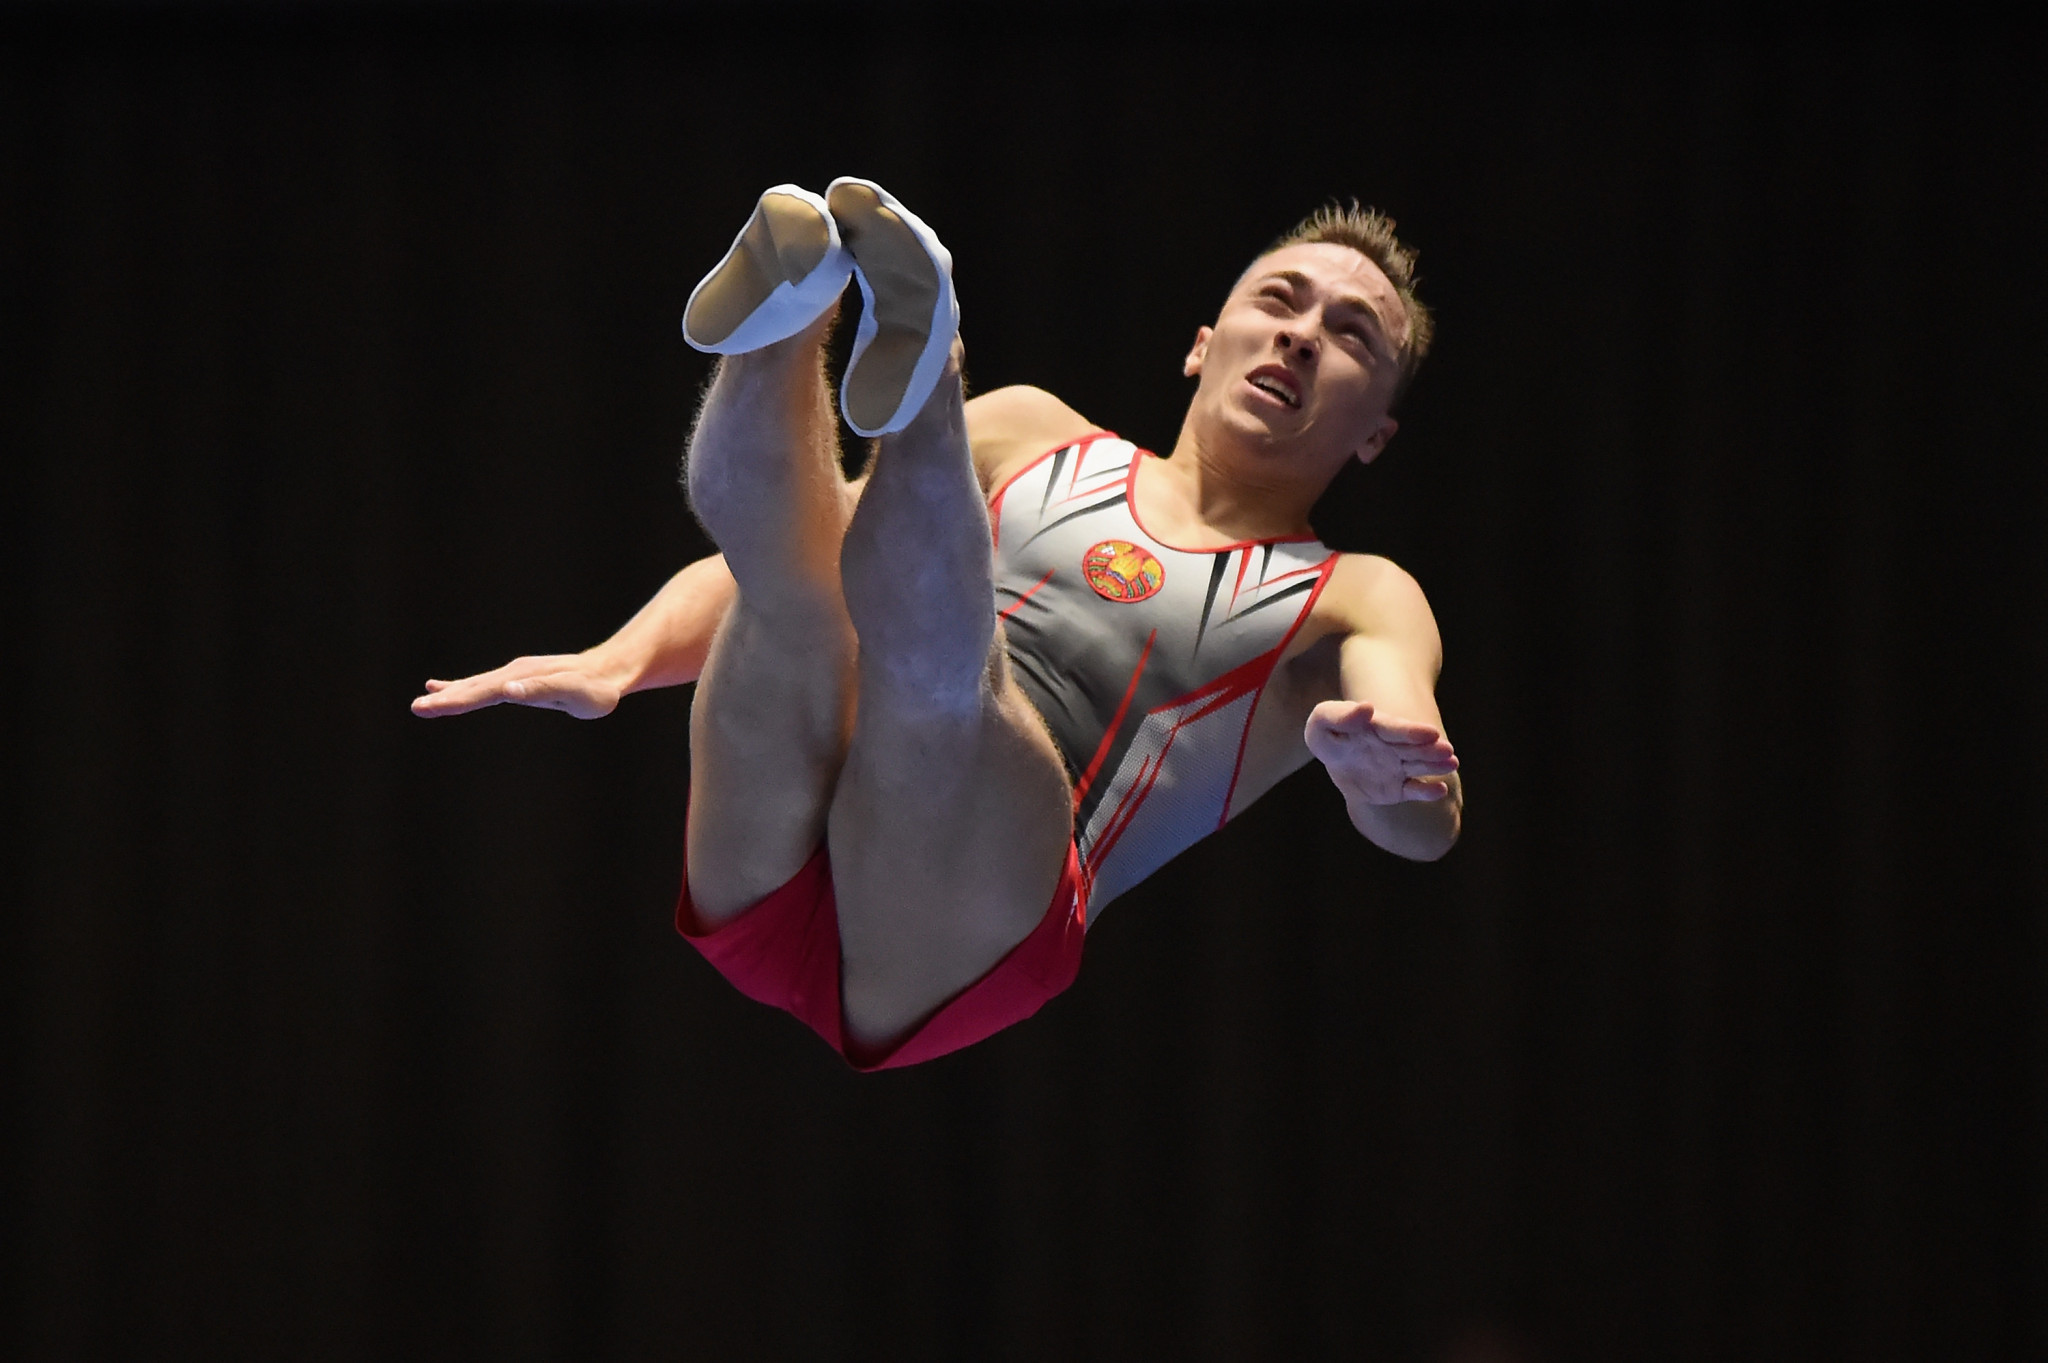 Olympic champion Hancharou looks to delight home crowd at FIG Trampoline World Cup 